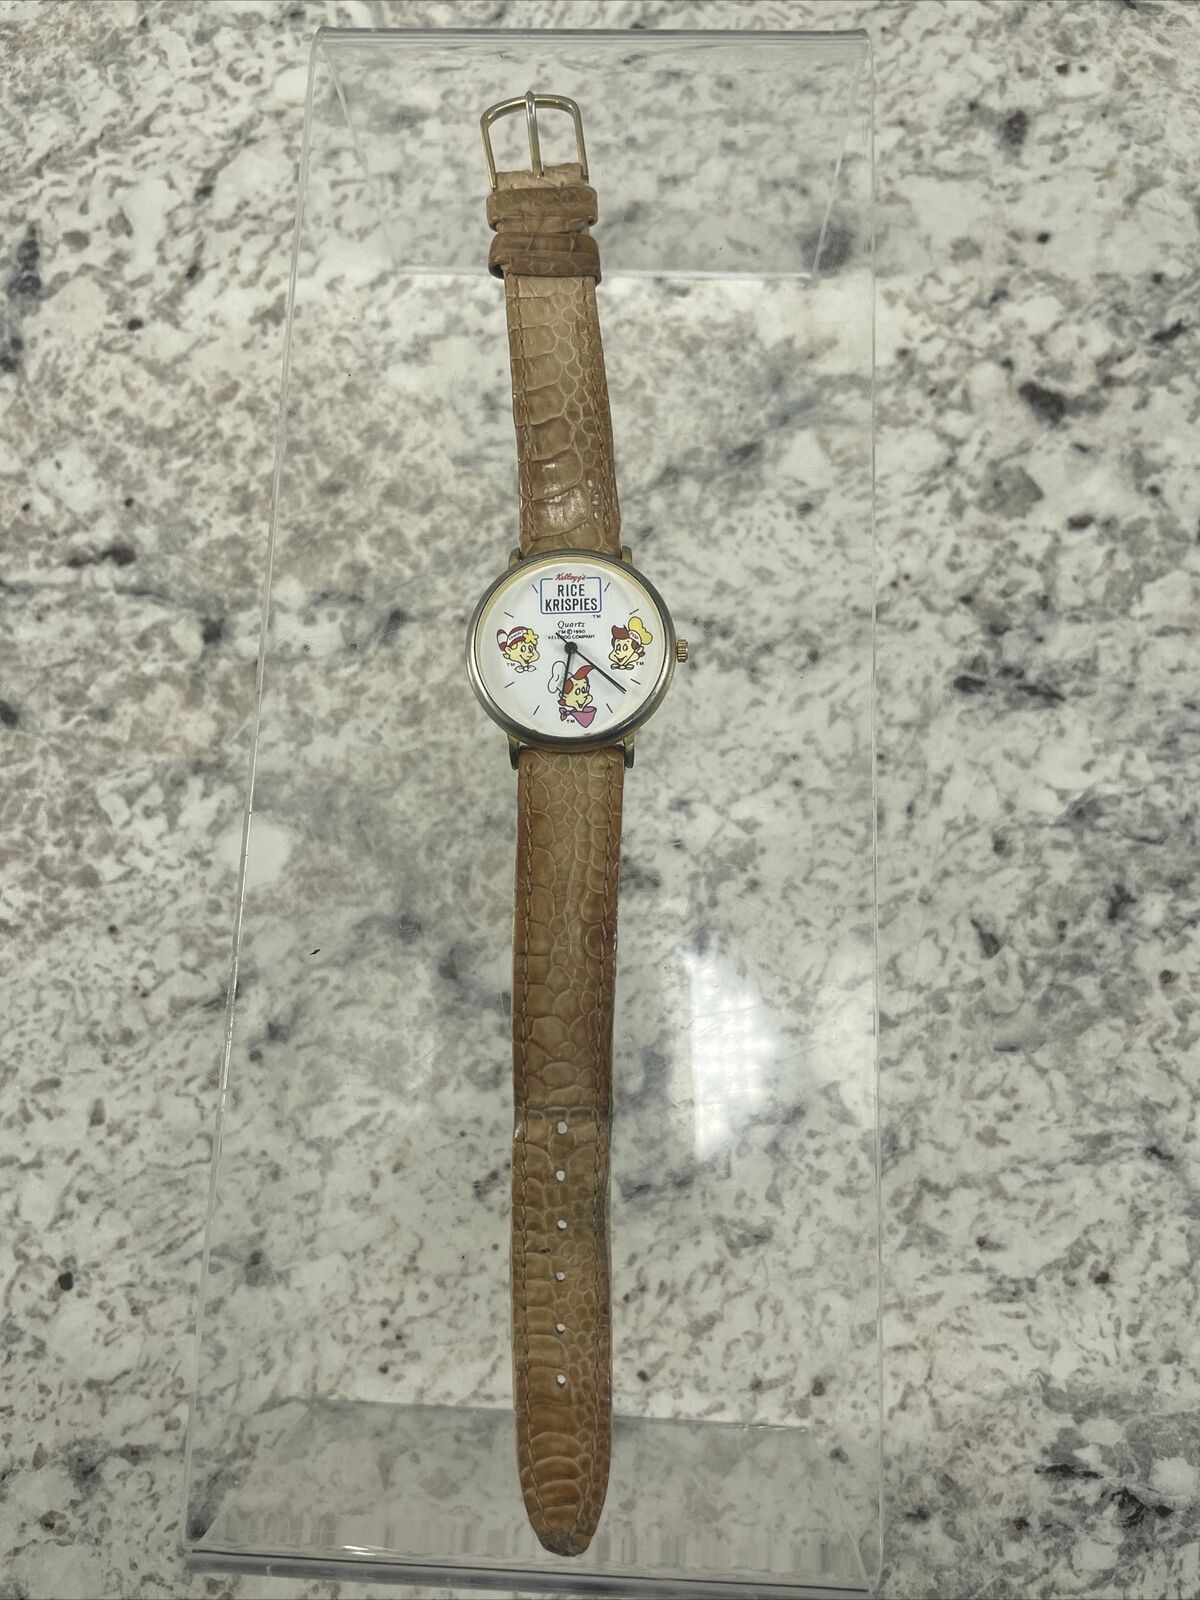 Vintage Kellogg Rice Krispies Cereal Watch With Band. Needs Battery